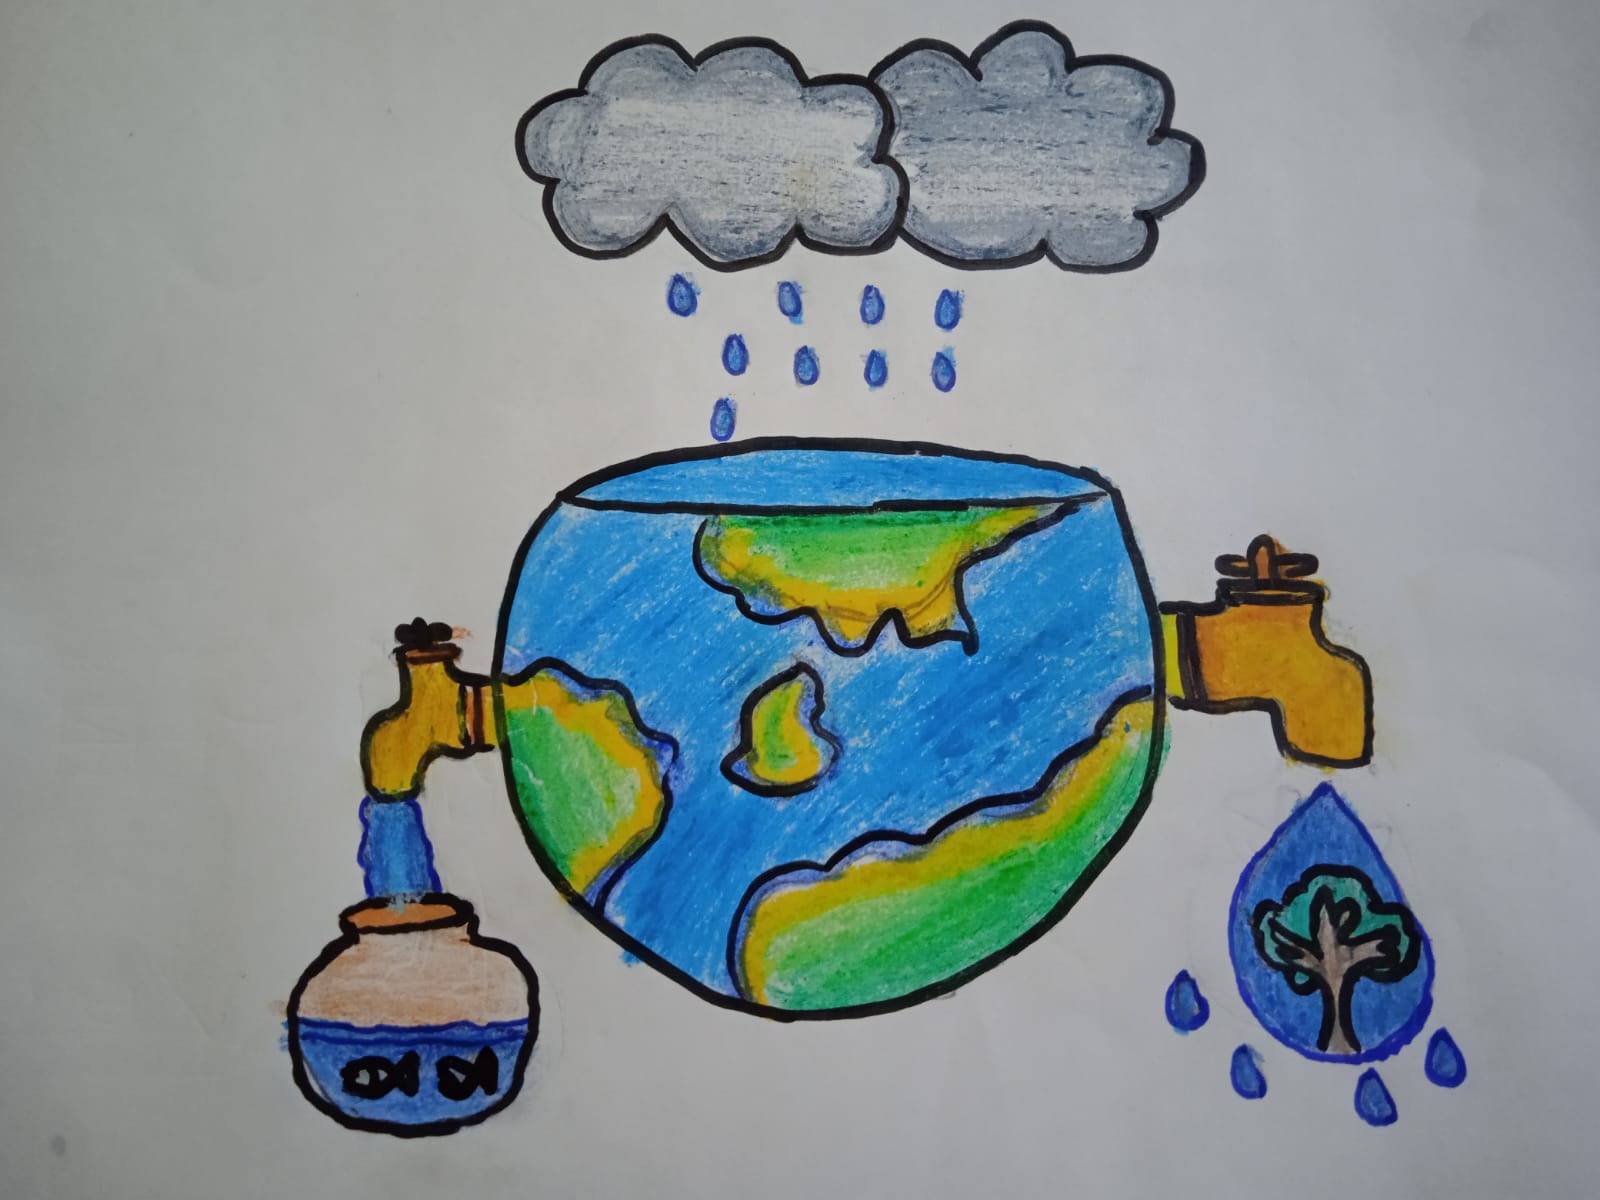 drawing water | How to draw Save Water drawing on World wate… | Flickr-nextbuild.com.vn